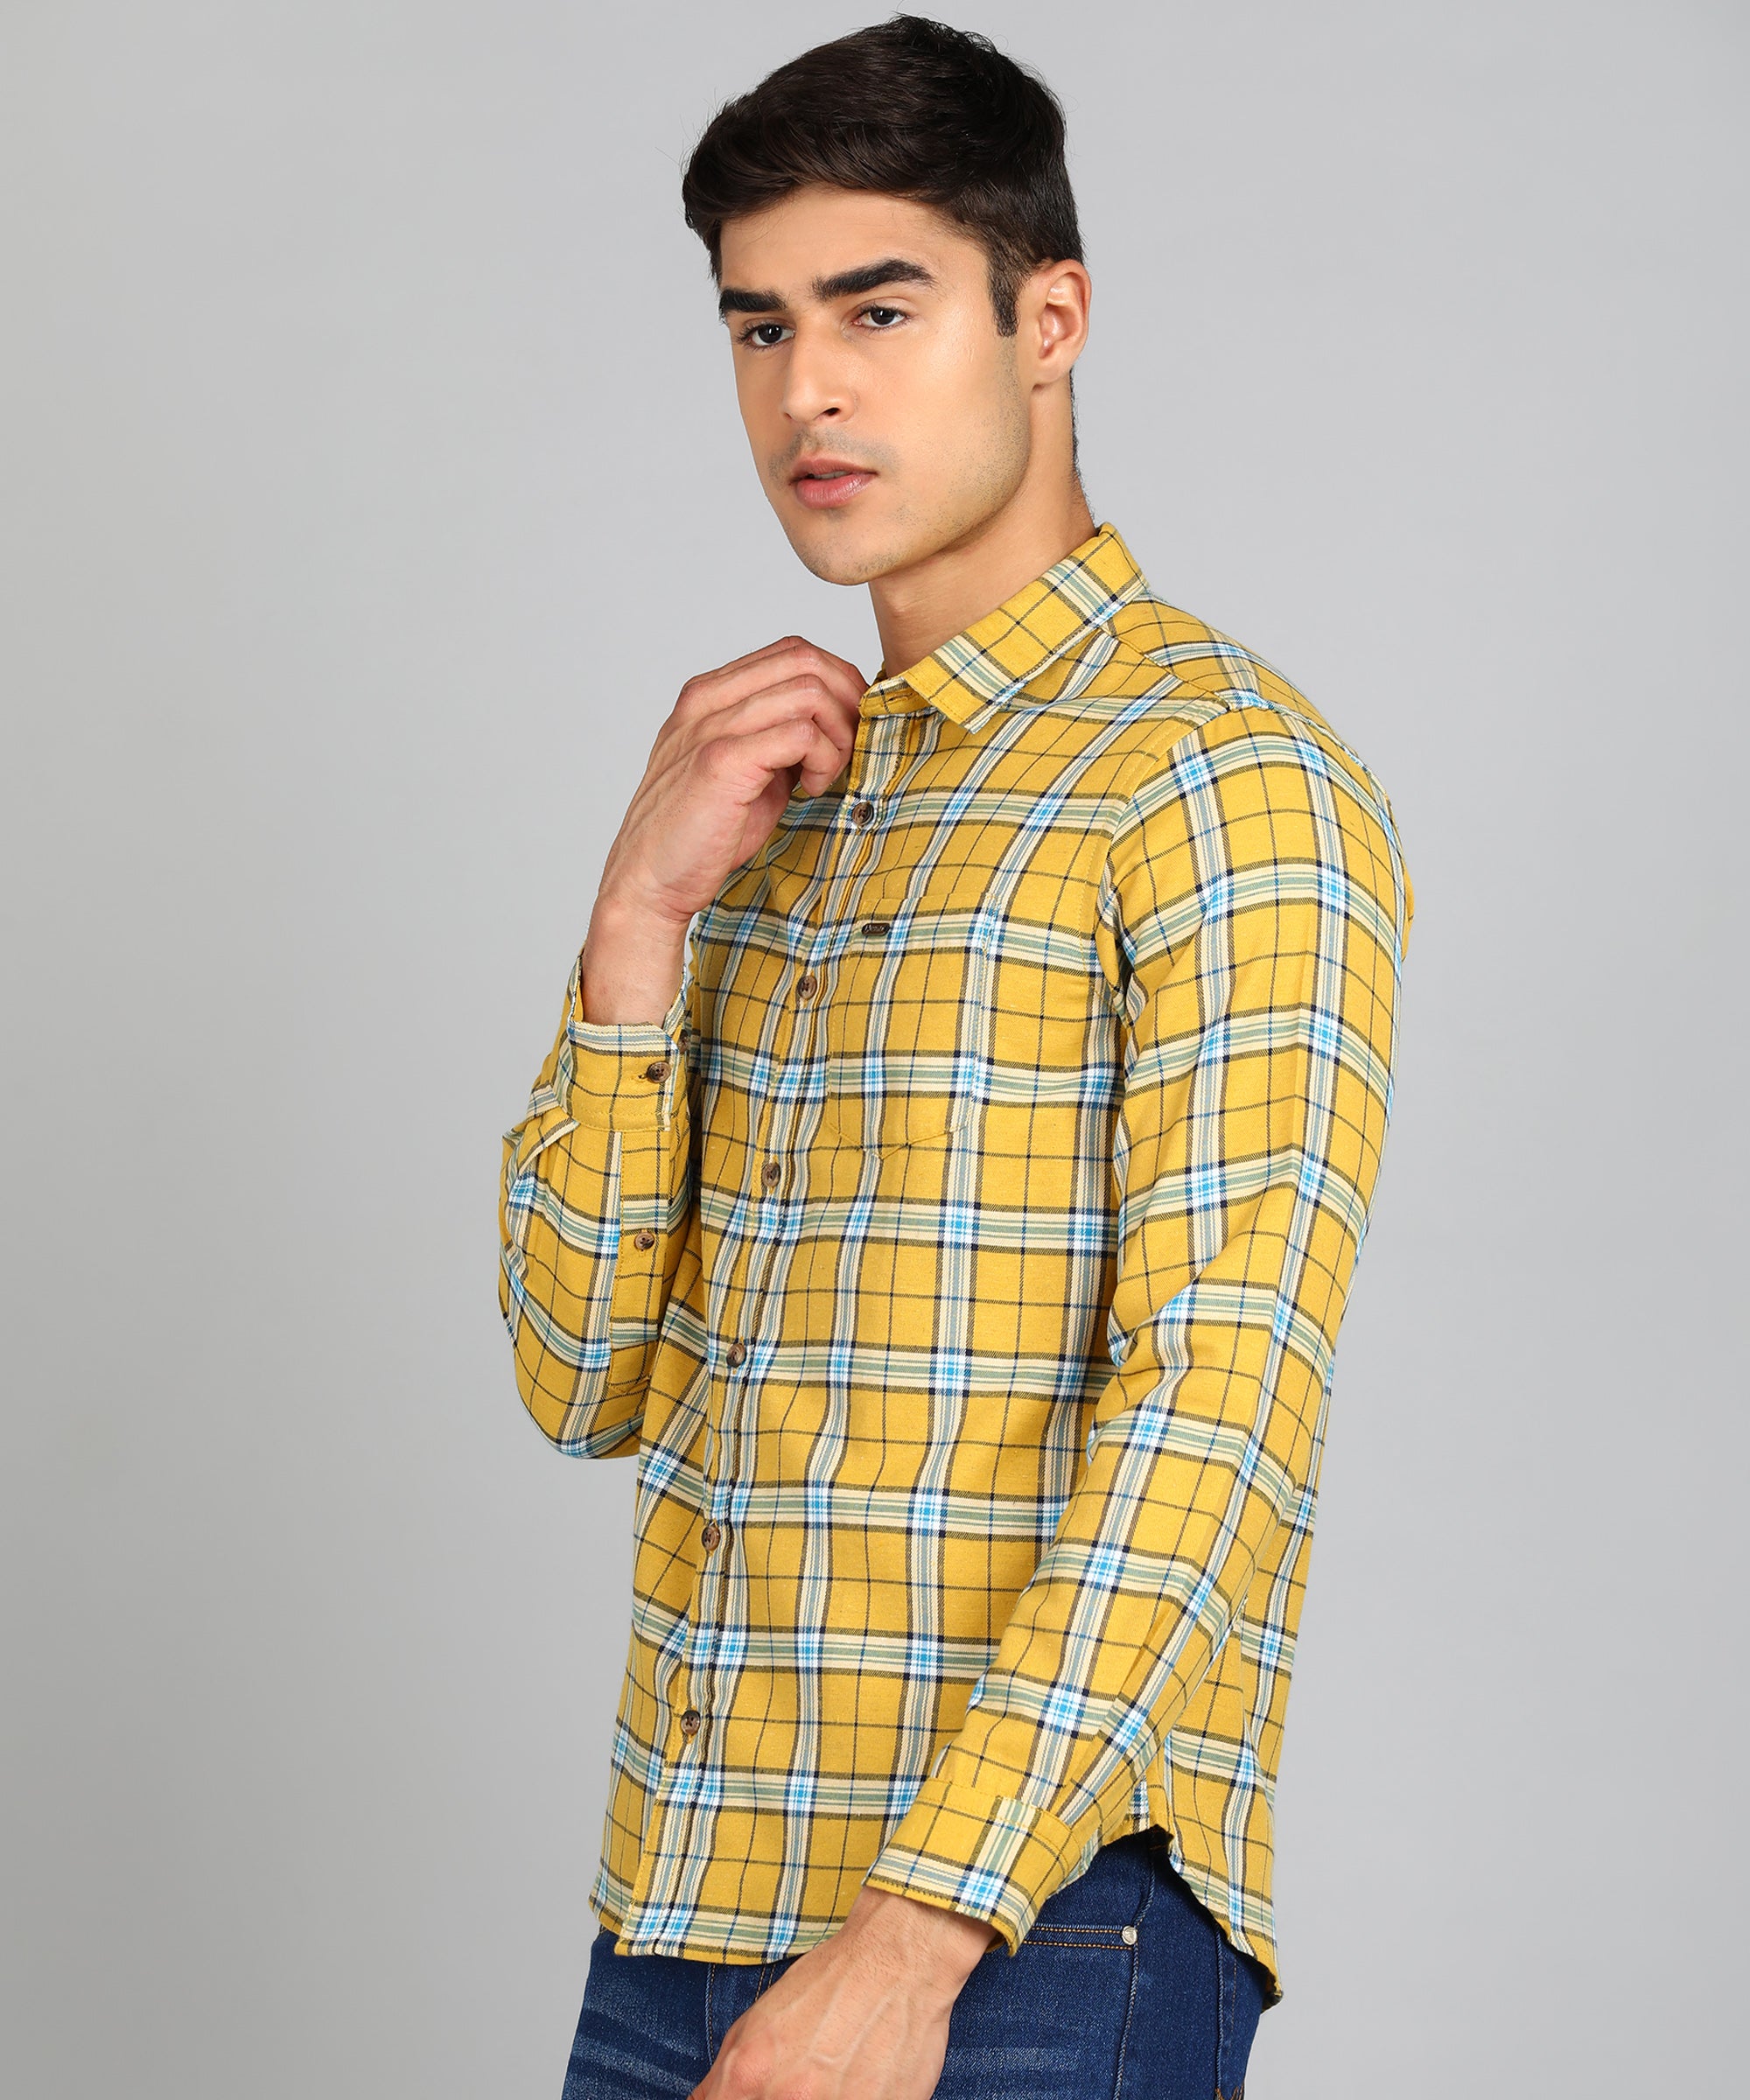 Men's Yellow Cotton Full Sleeve Slim Fit Casual Checkered Shirt